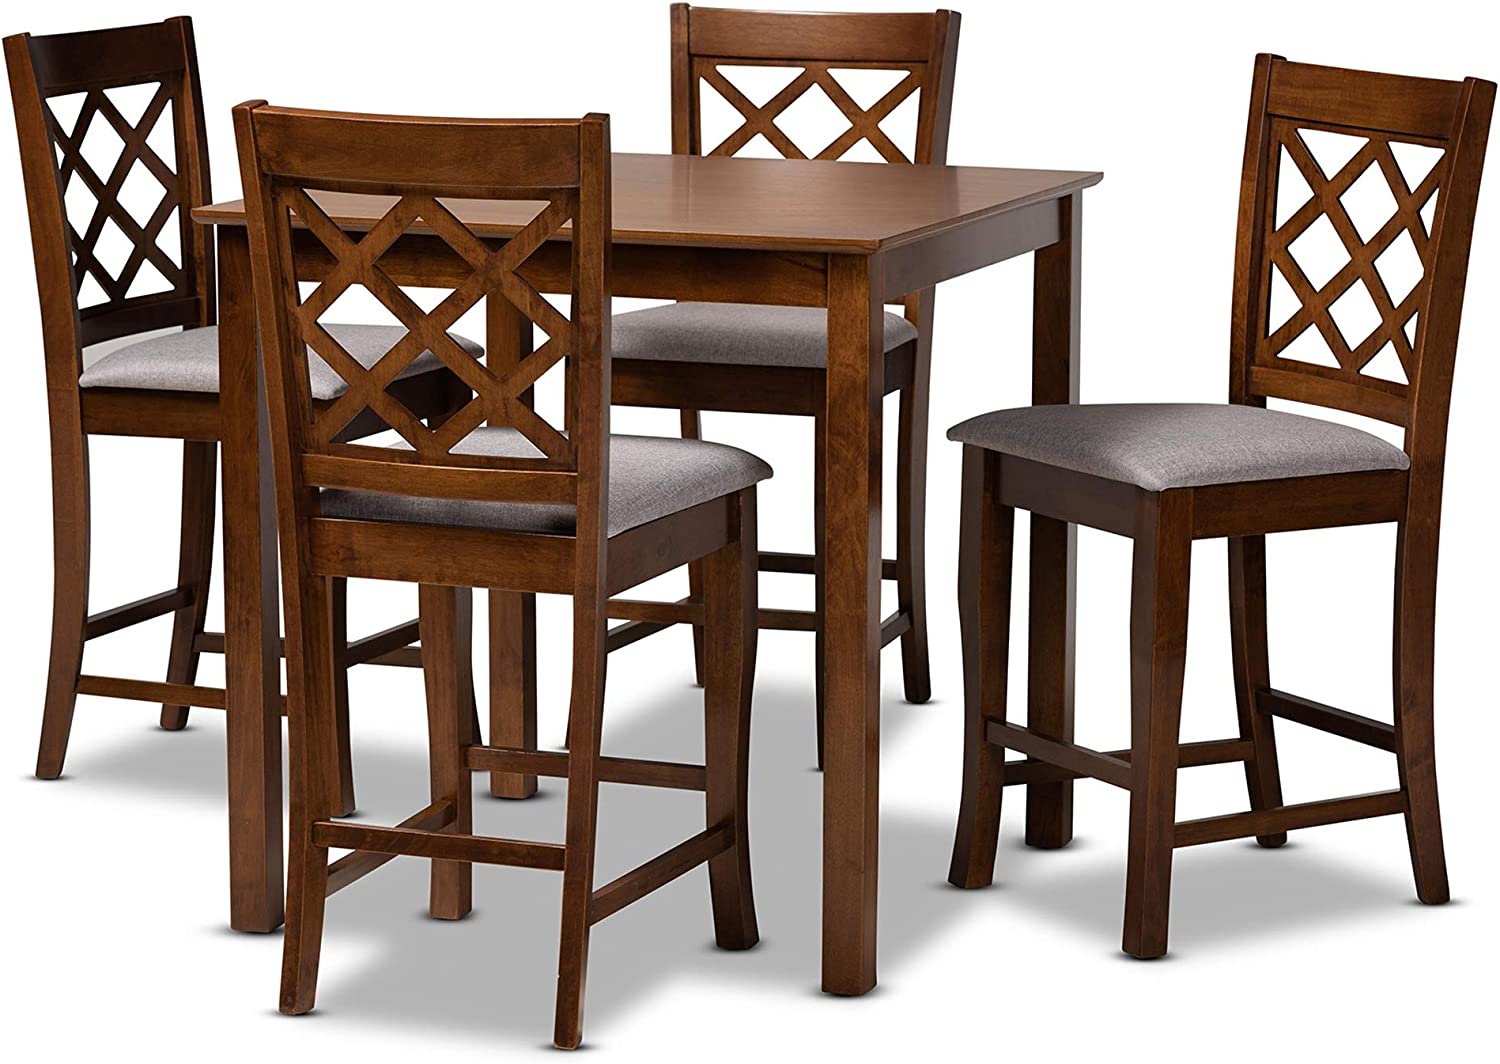 Baxton Studio Alora Modern and Contemporary Grey Fabric Upholstered Walnut Brown Finished 5-Piece Wood Pub Set